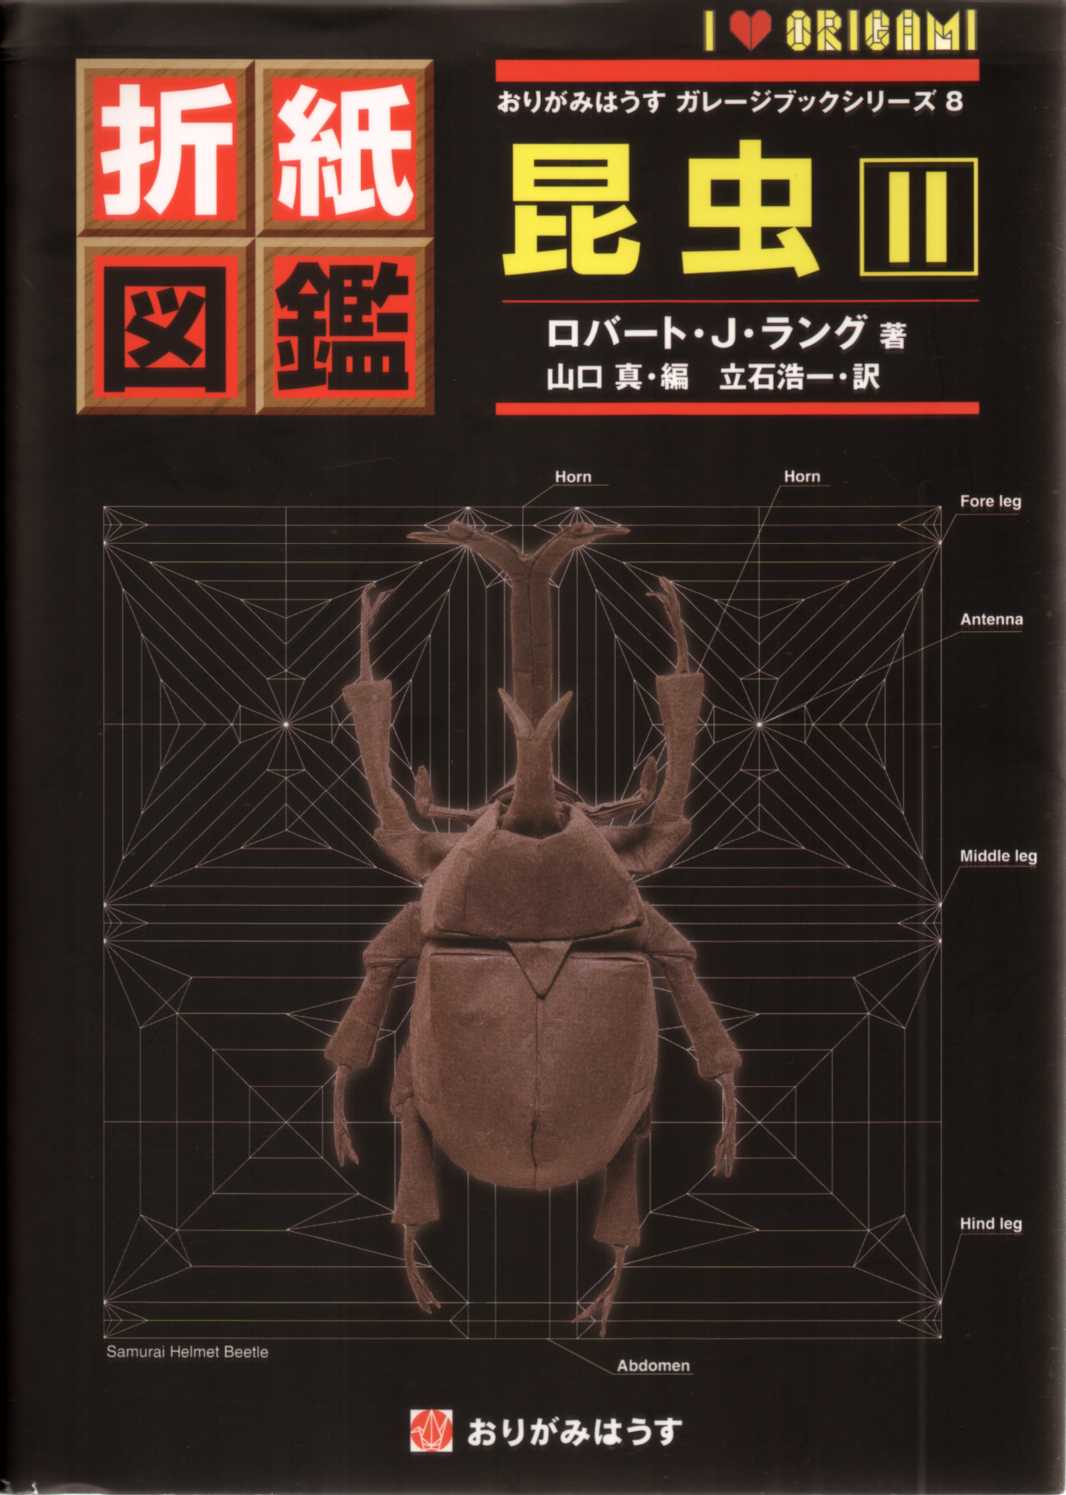 Origami Insects II / 折紙図鑑　昆虫・2 : page 118.